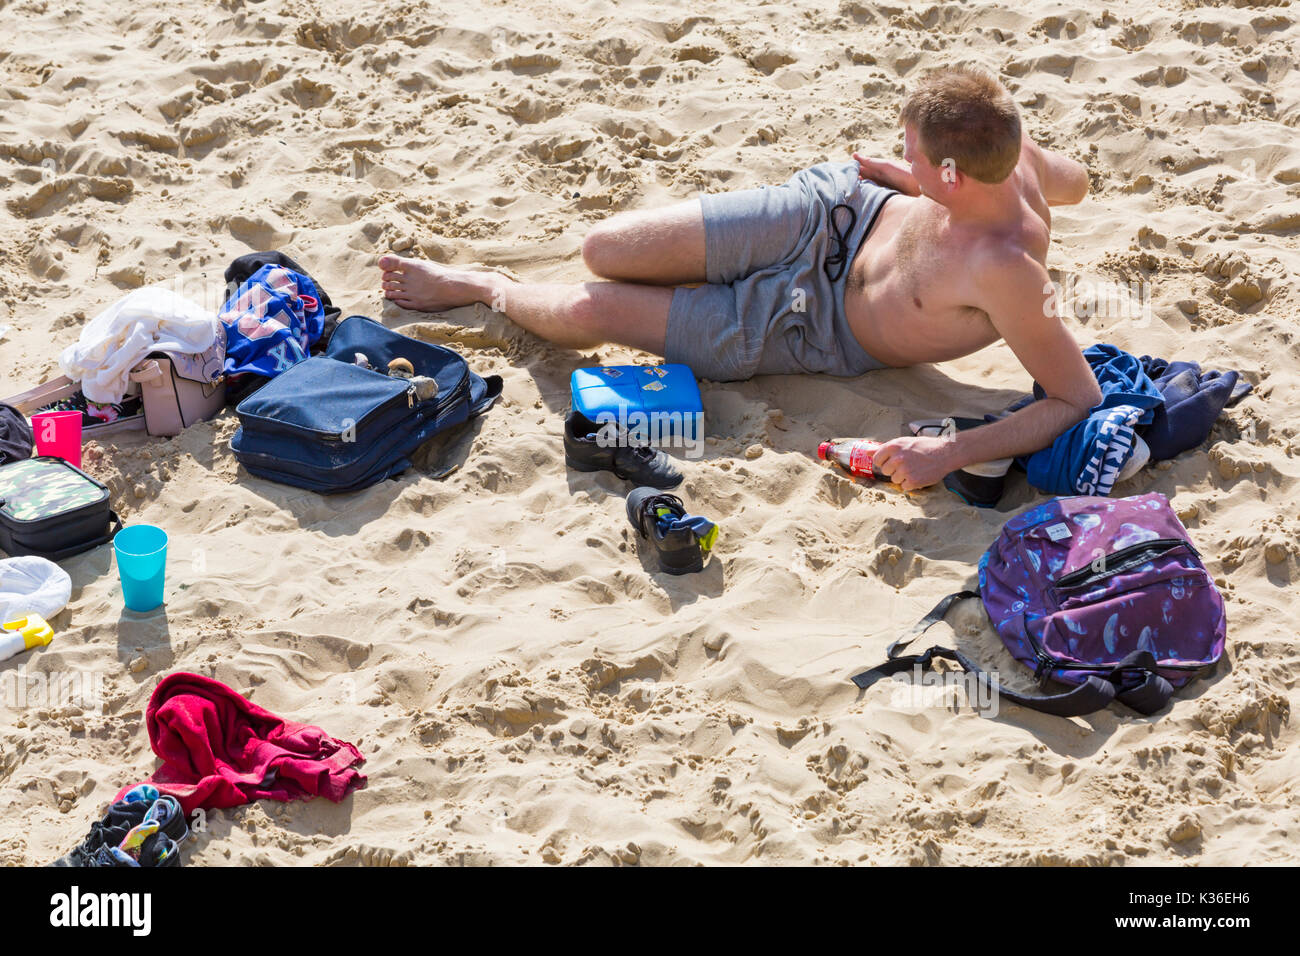 Bournemouth, Dorset, UK. 1st Sep, 2017. UK weather: lovely warm sunny day at Bournemouth beach as visitors enjoy the seaside whilst waiting for action for the second day of the Bournemouth Air Festival. Credit: Carolyn Jenkins/Alamy Live News Stock Photo